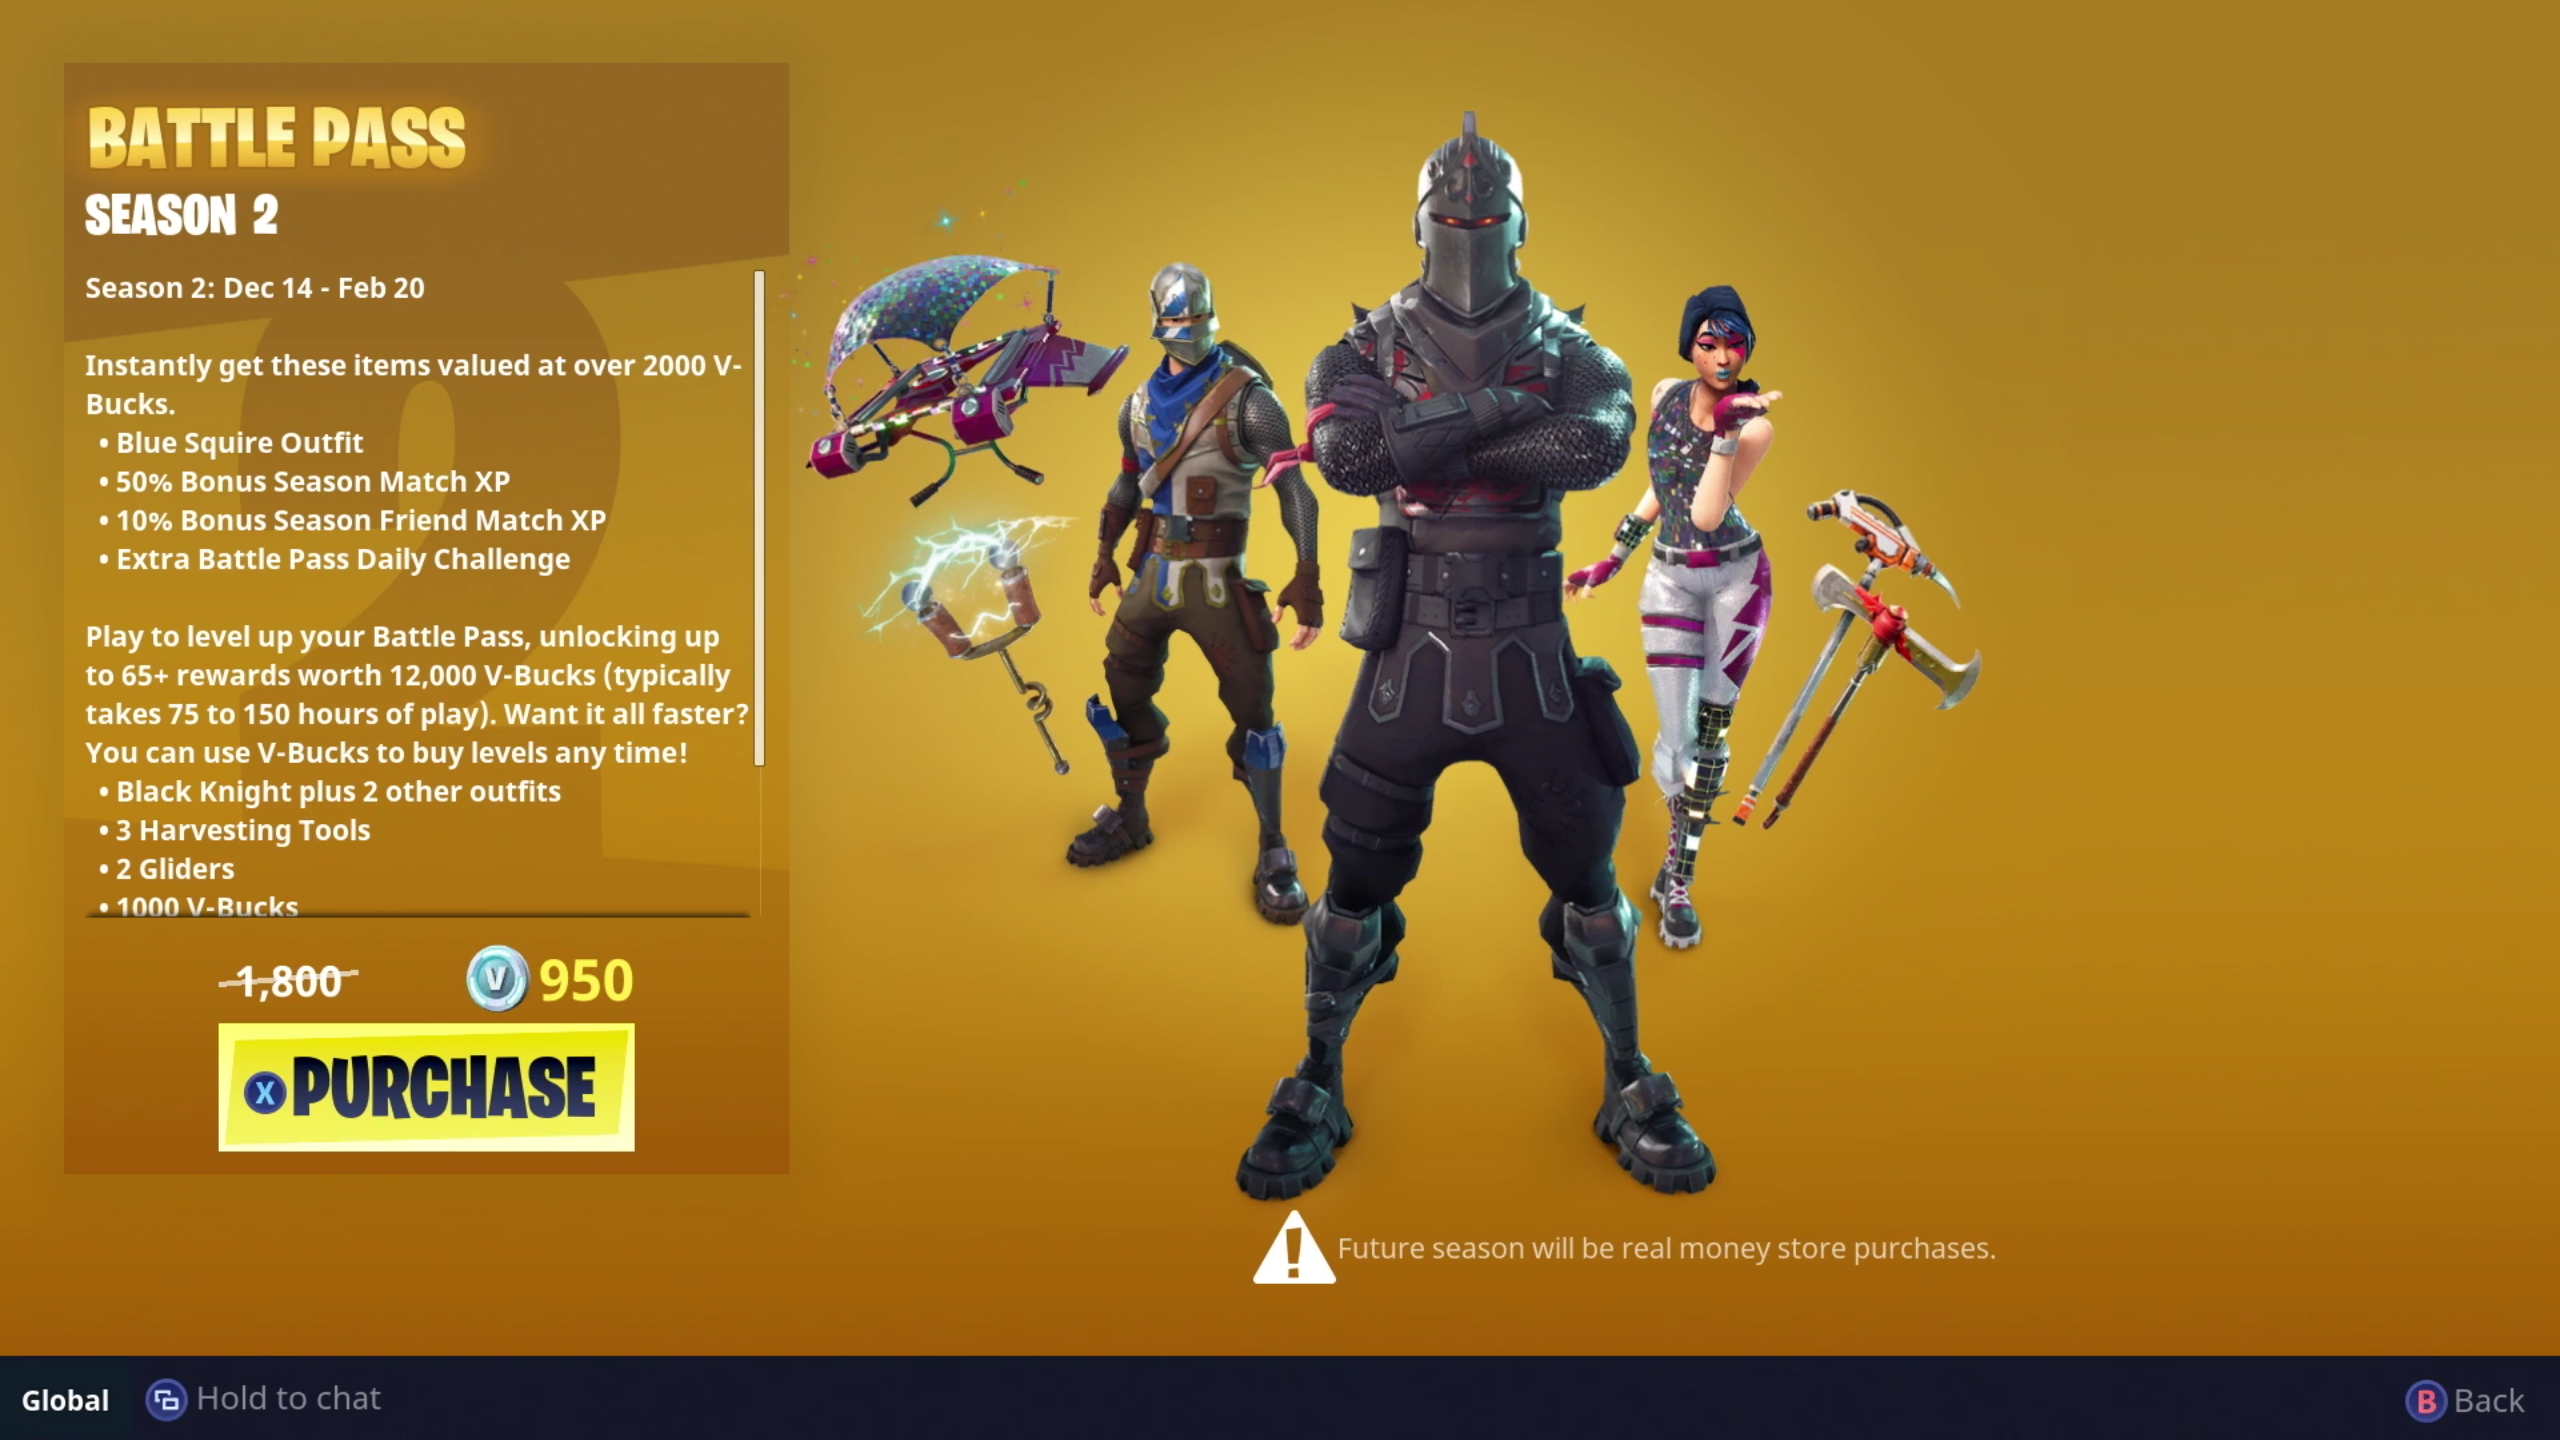 Fortnite Battle Royal What's New? — Steemkr - 2560 x 1440 png 1818kB